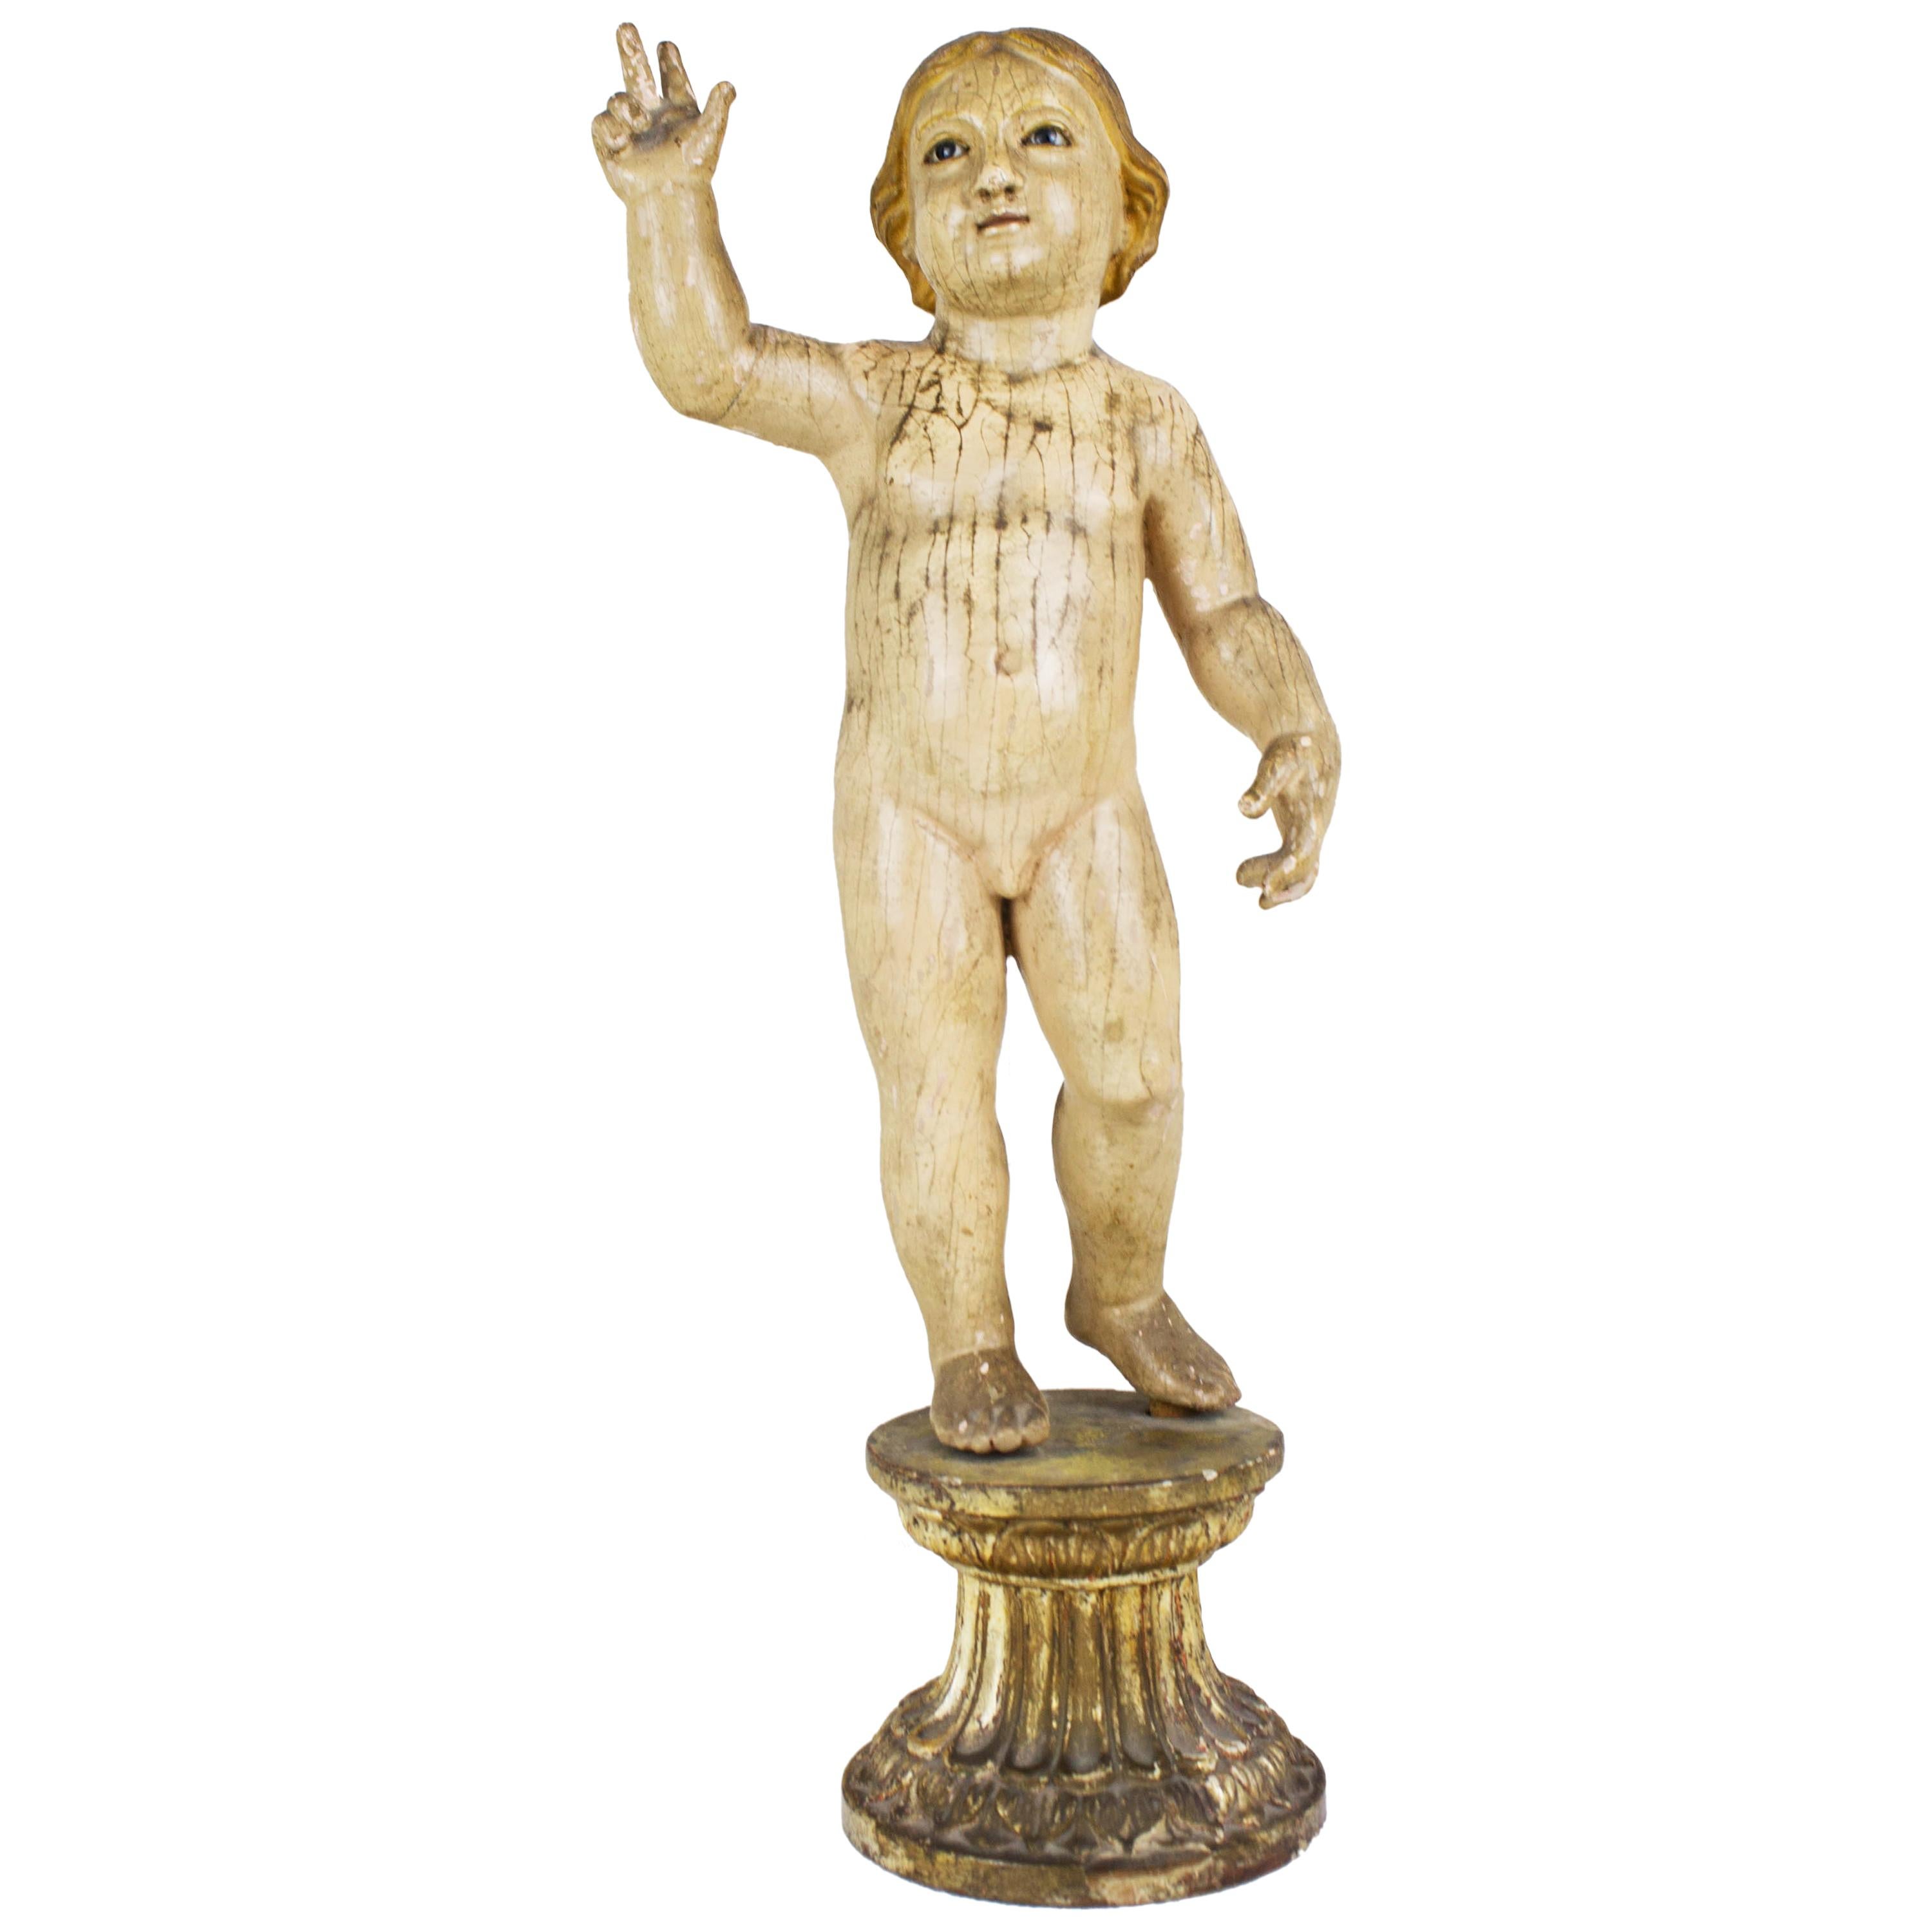 18th Century Wood Sculpture "Bambino Gesu" with Eyes in Glass For Sale